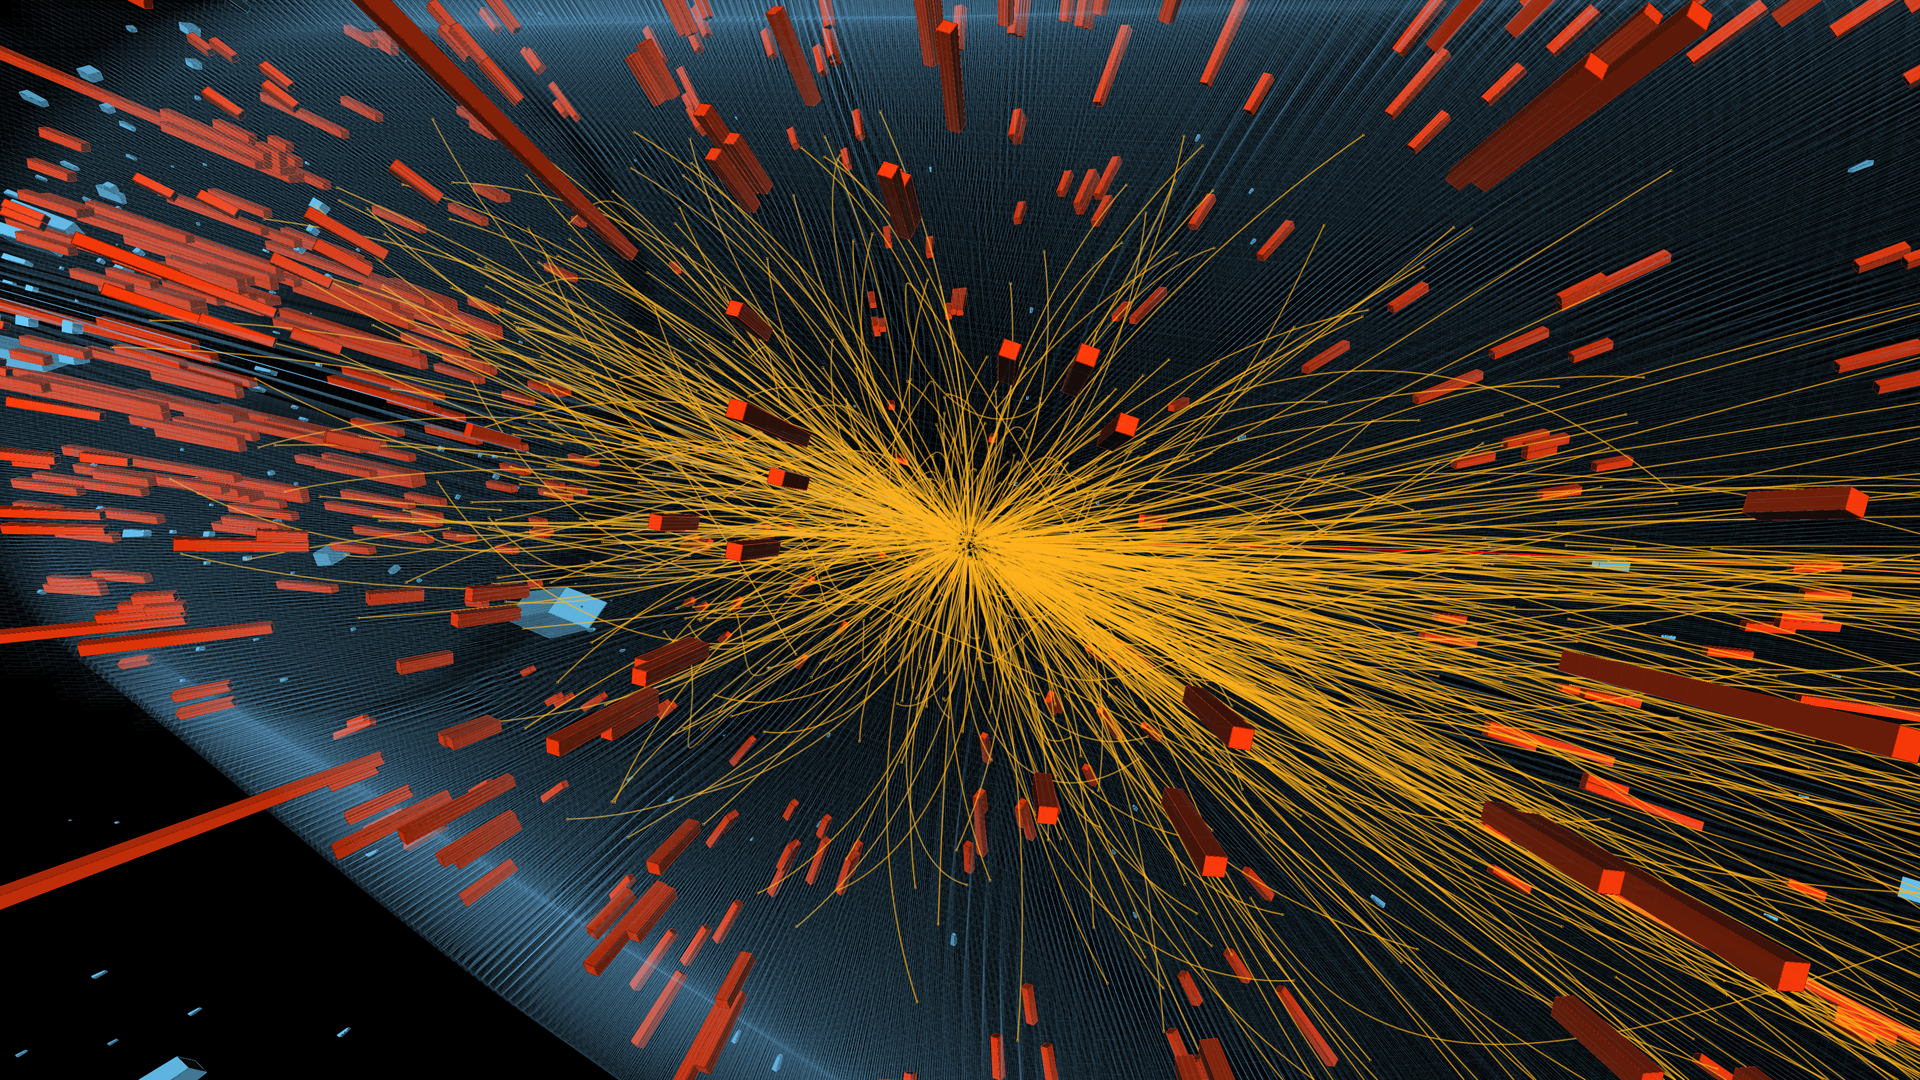 Image 1: Event display for a high-multiplicity pPb collision at 5.02 TeV with about 420 tracks produced, recorded by CMS in 2013.